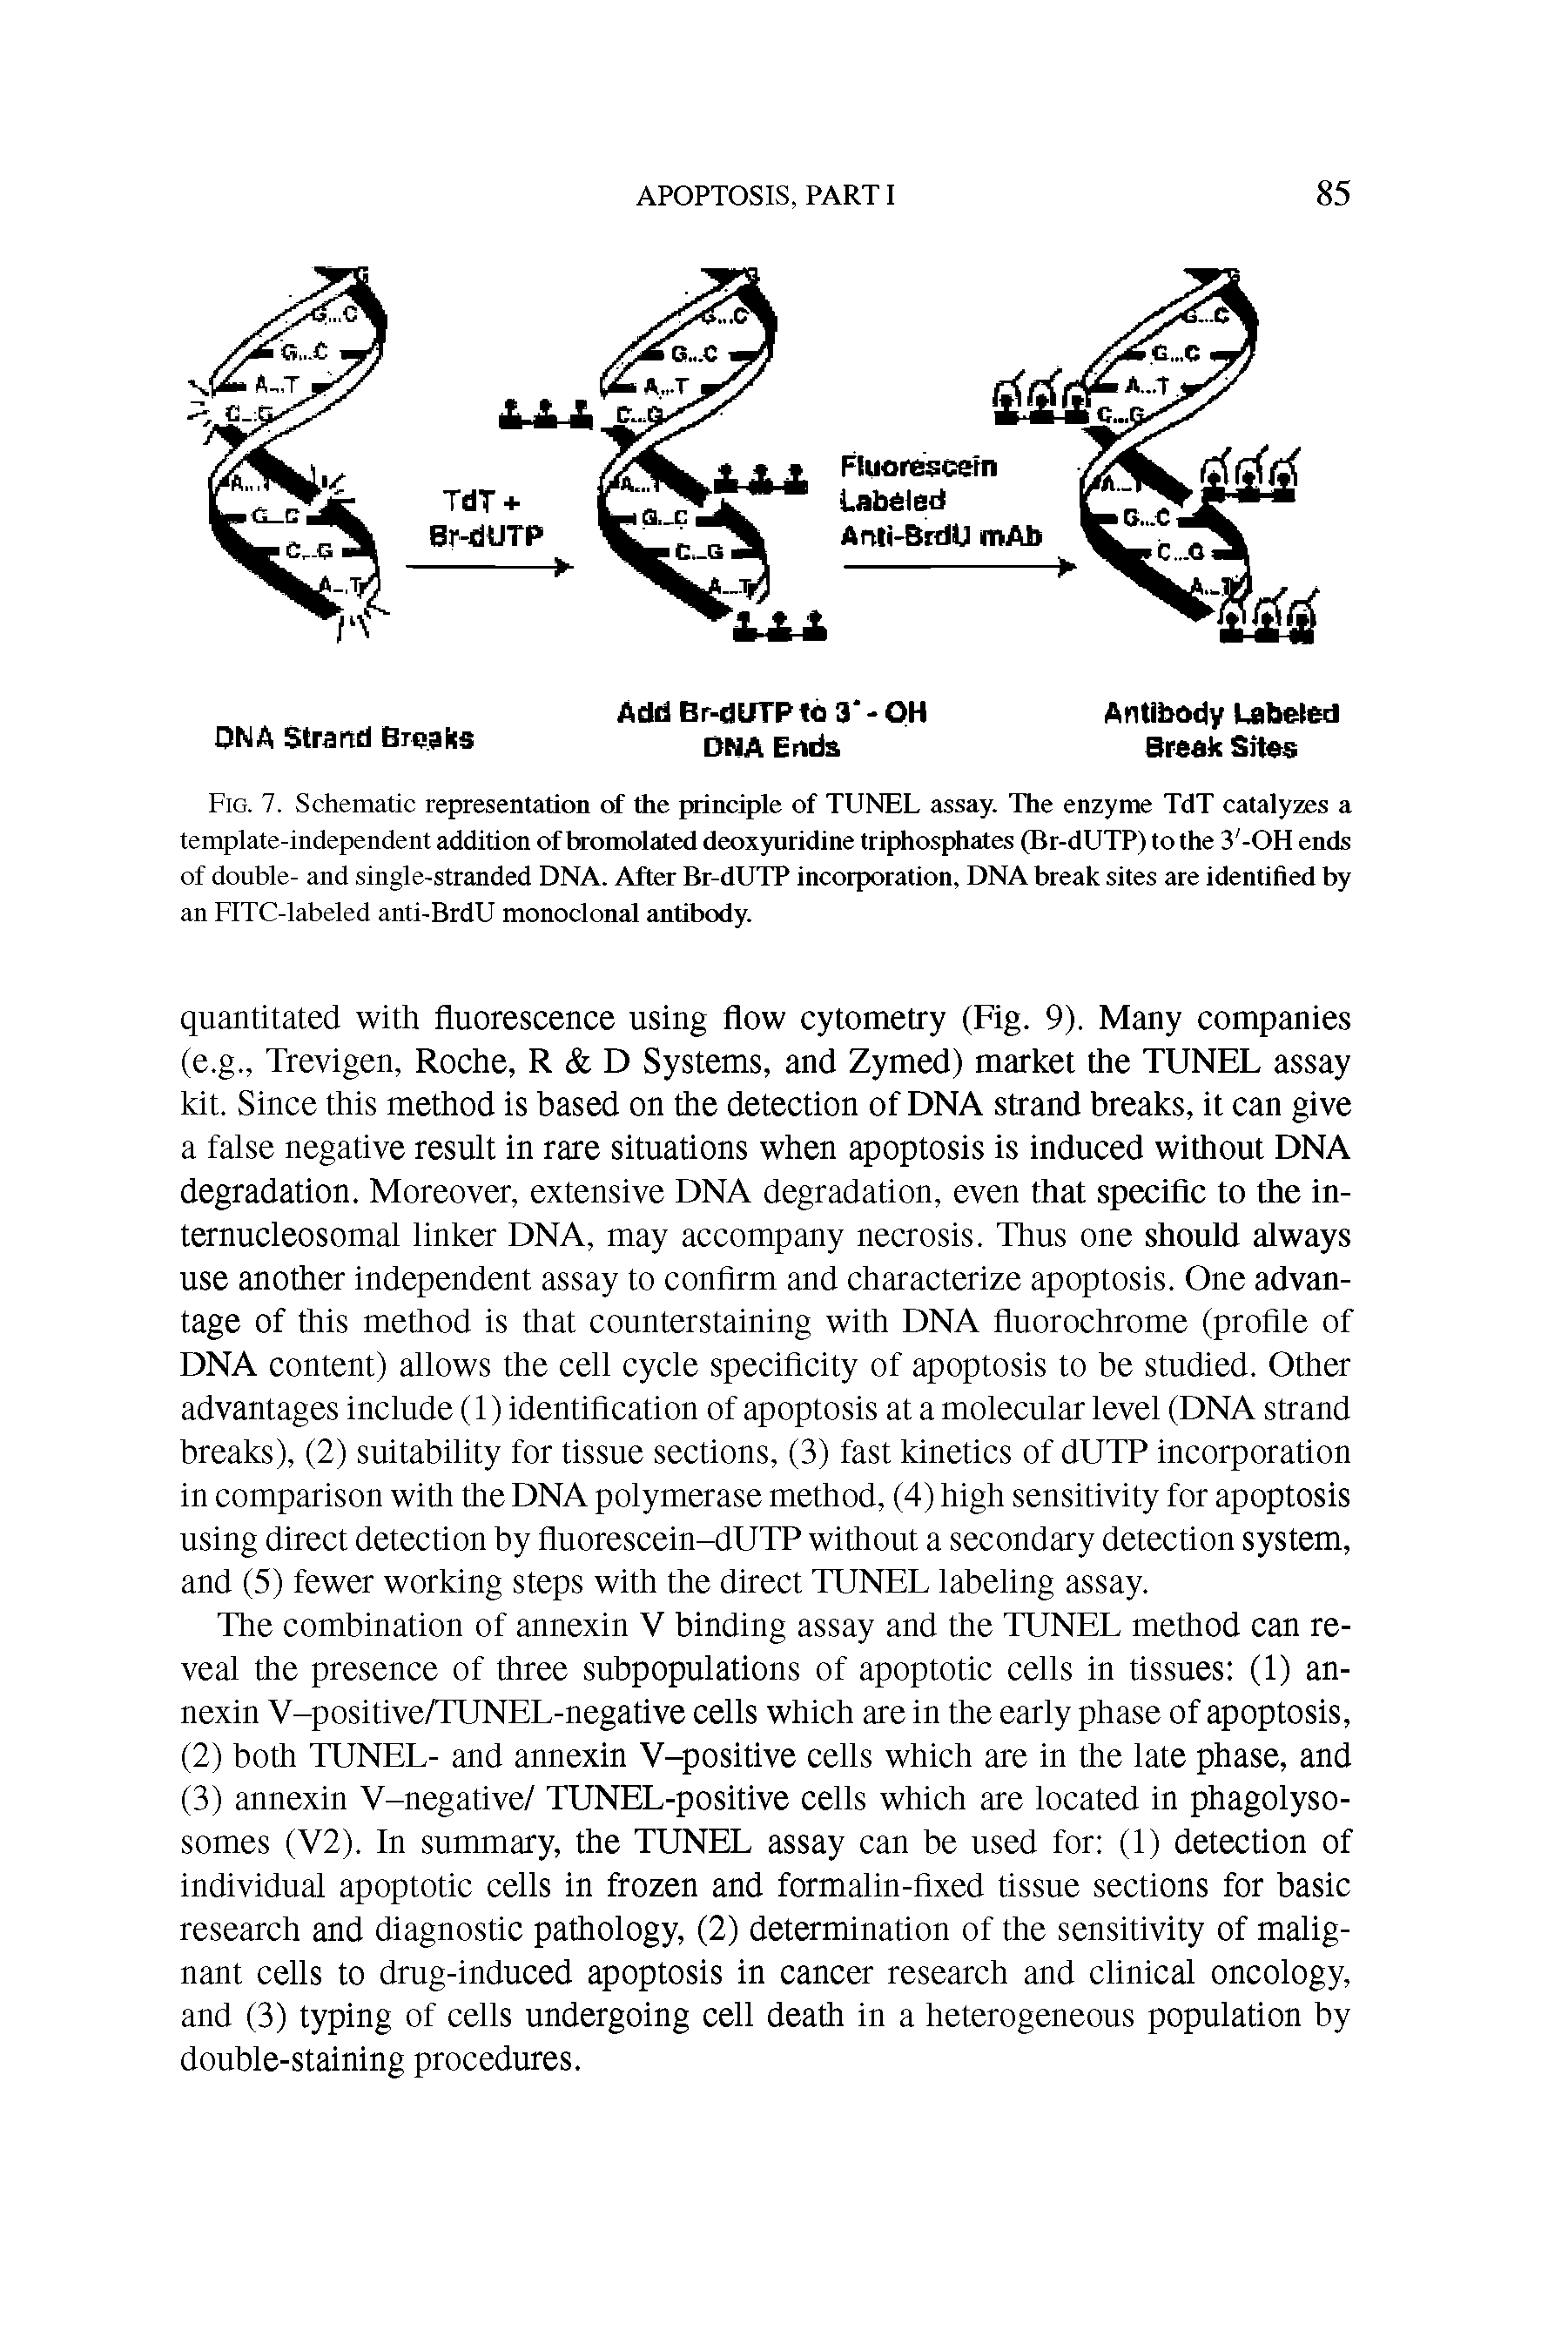 Fig. 7. Schematic representation of the principle of TUNEL assay. The enzyme TdT catalyzes a template-independent addition of bromolated deoxyuridine triphosphates (Br-dUTP) to the 3 -OH ends of double- and single-stranded DNA. After Br-dUTP incorporation, DNA break sites are identified by an FITC-labeled anti-BrdU monoclonal antibody.